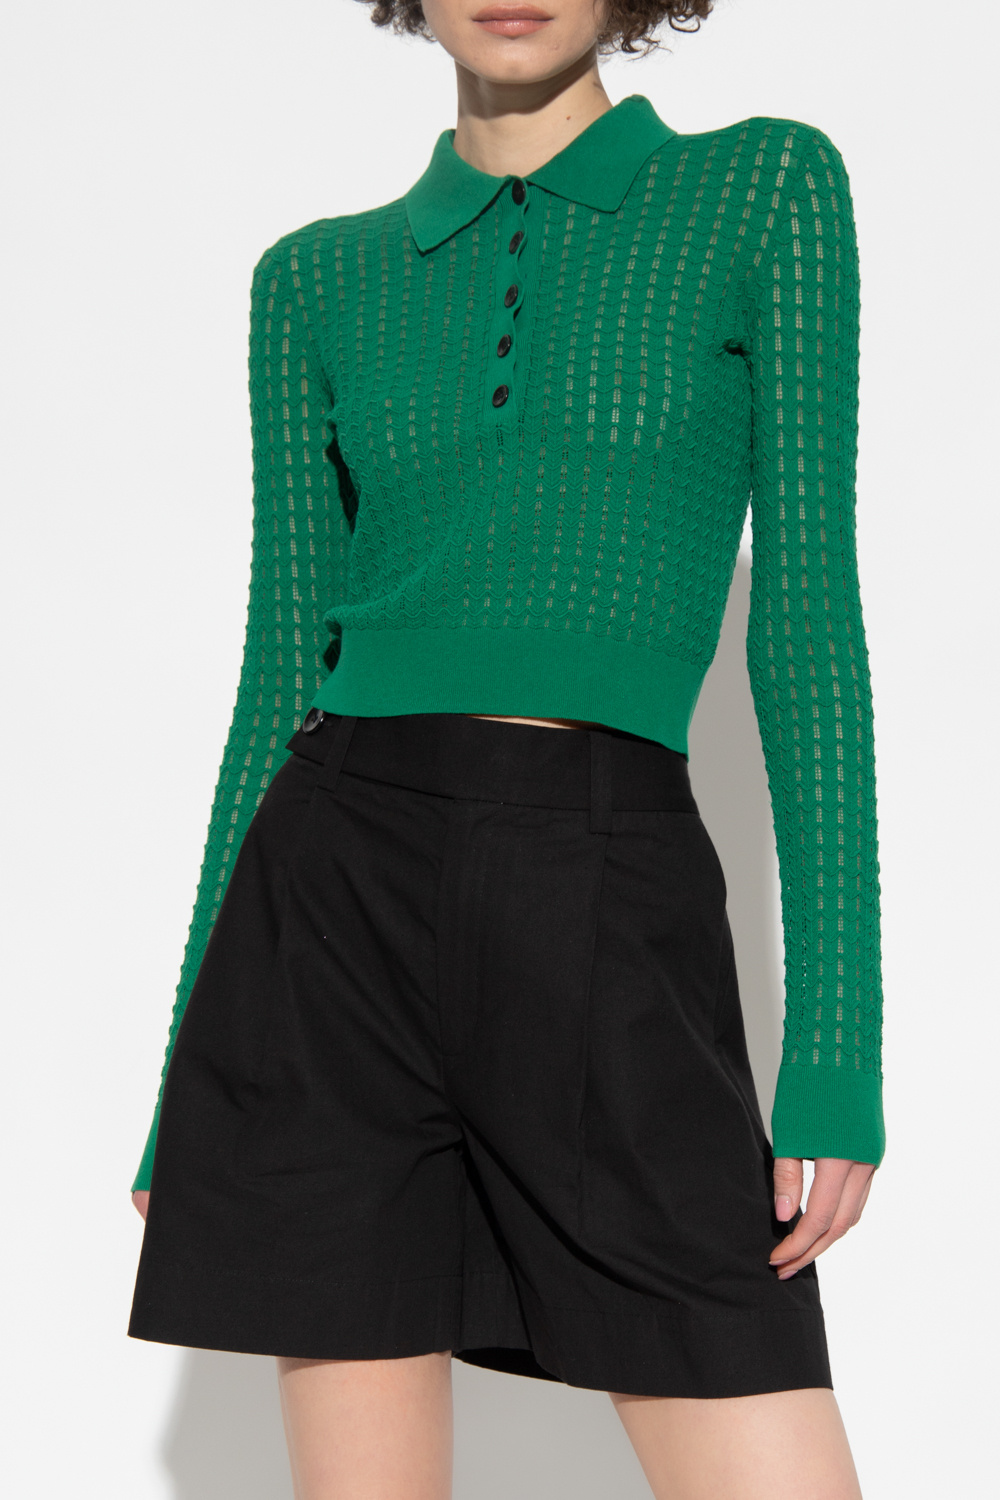 Proenza Schouler White Label Form-fitting top